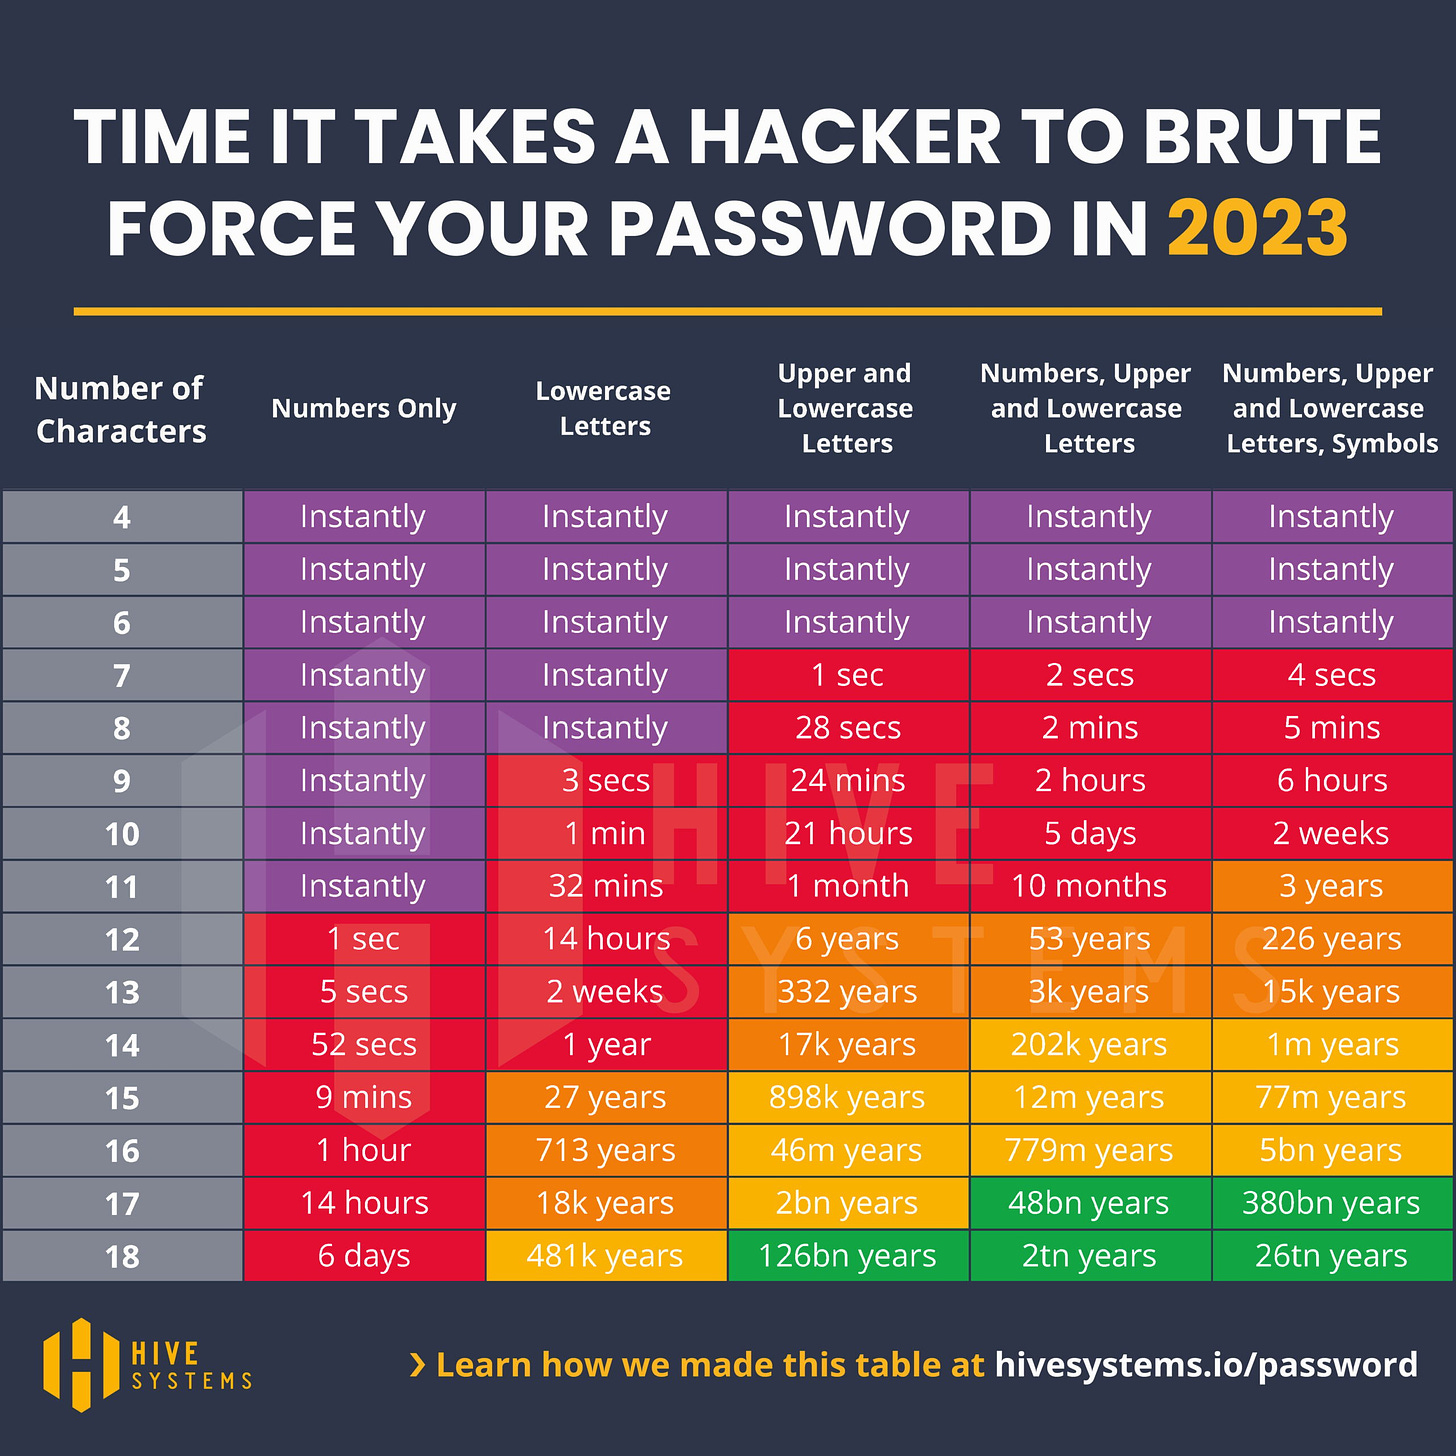 time it takes a hacker to brute force your password in 2023, hive systems